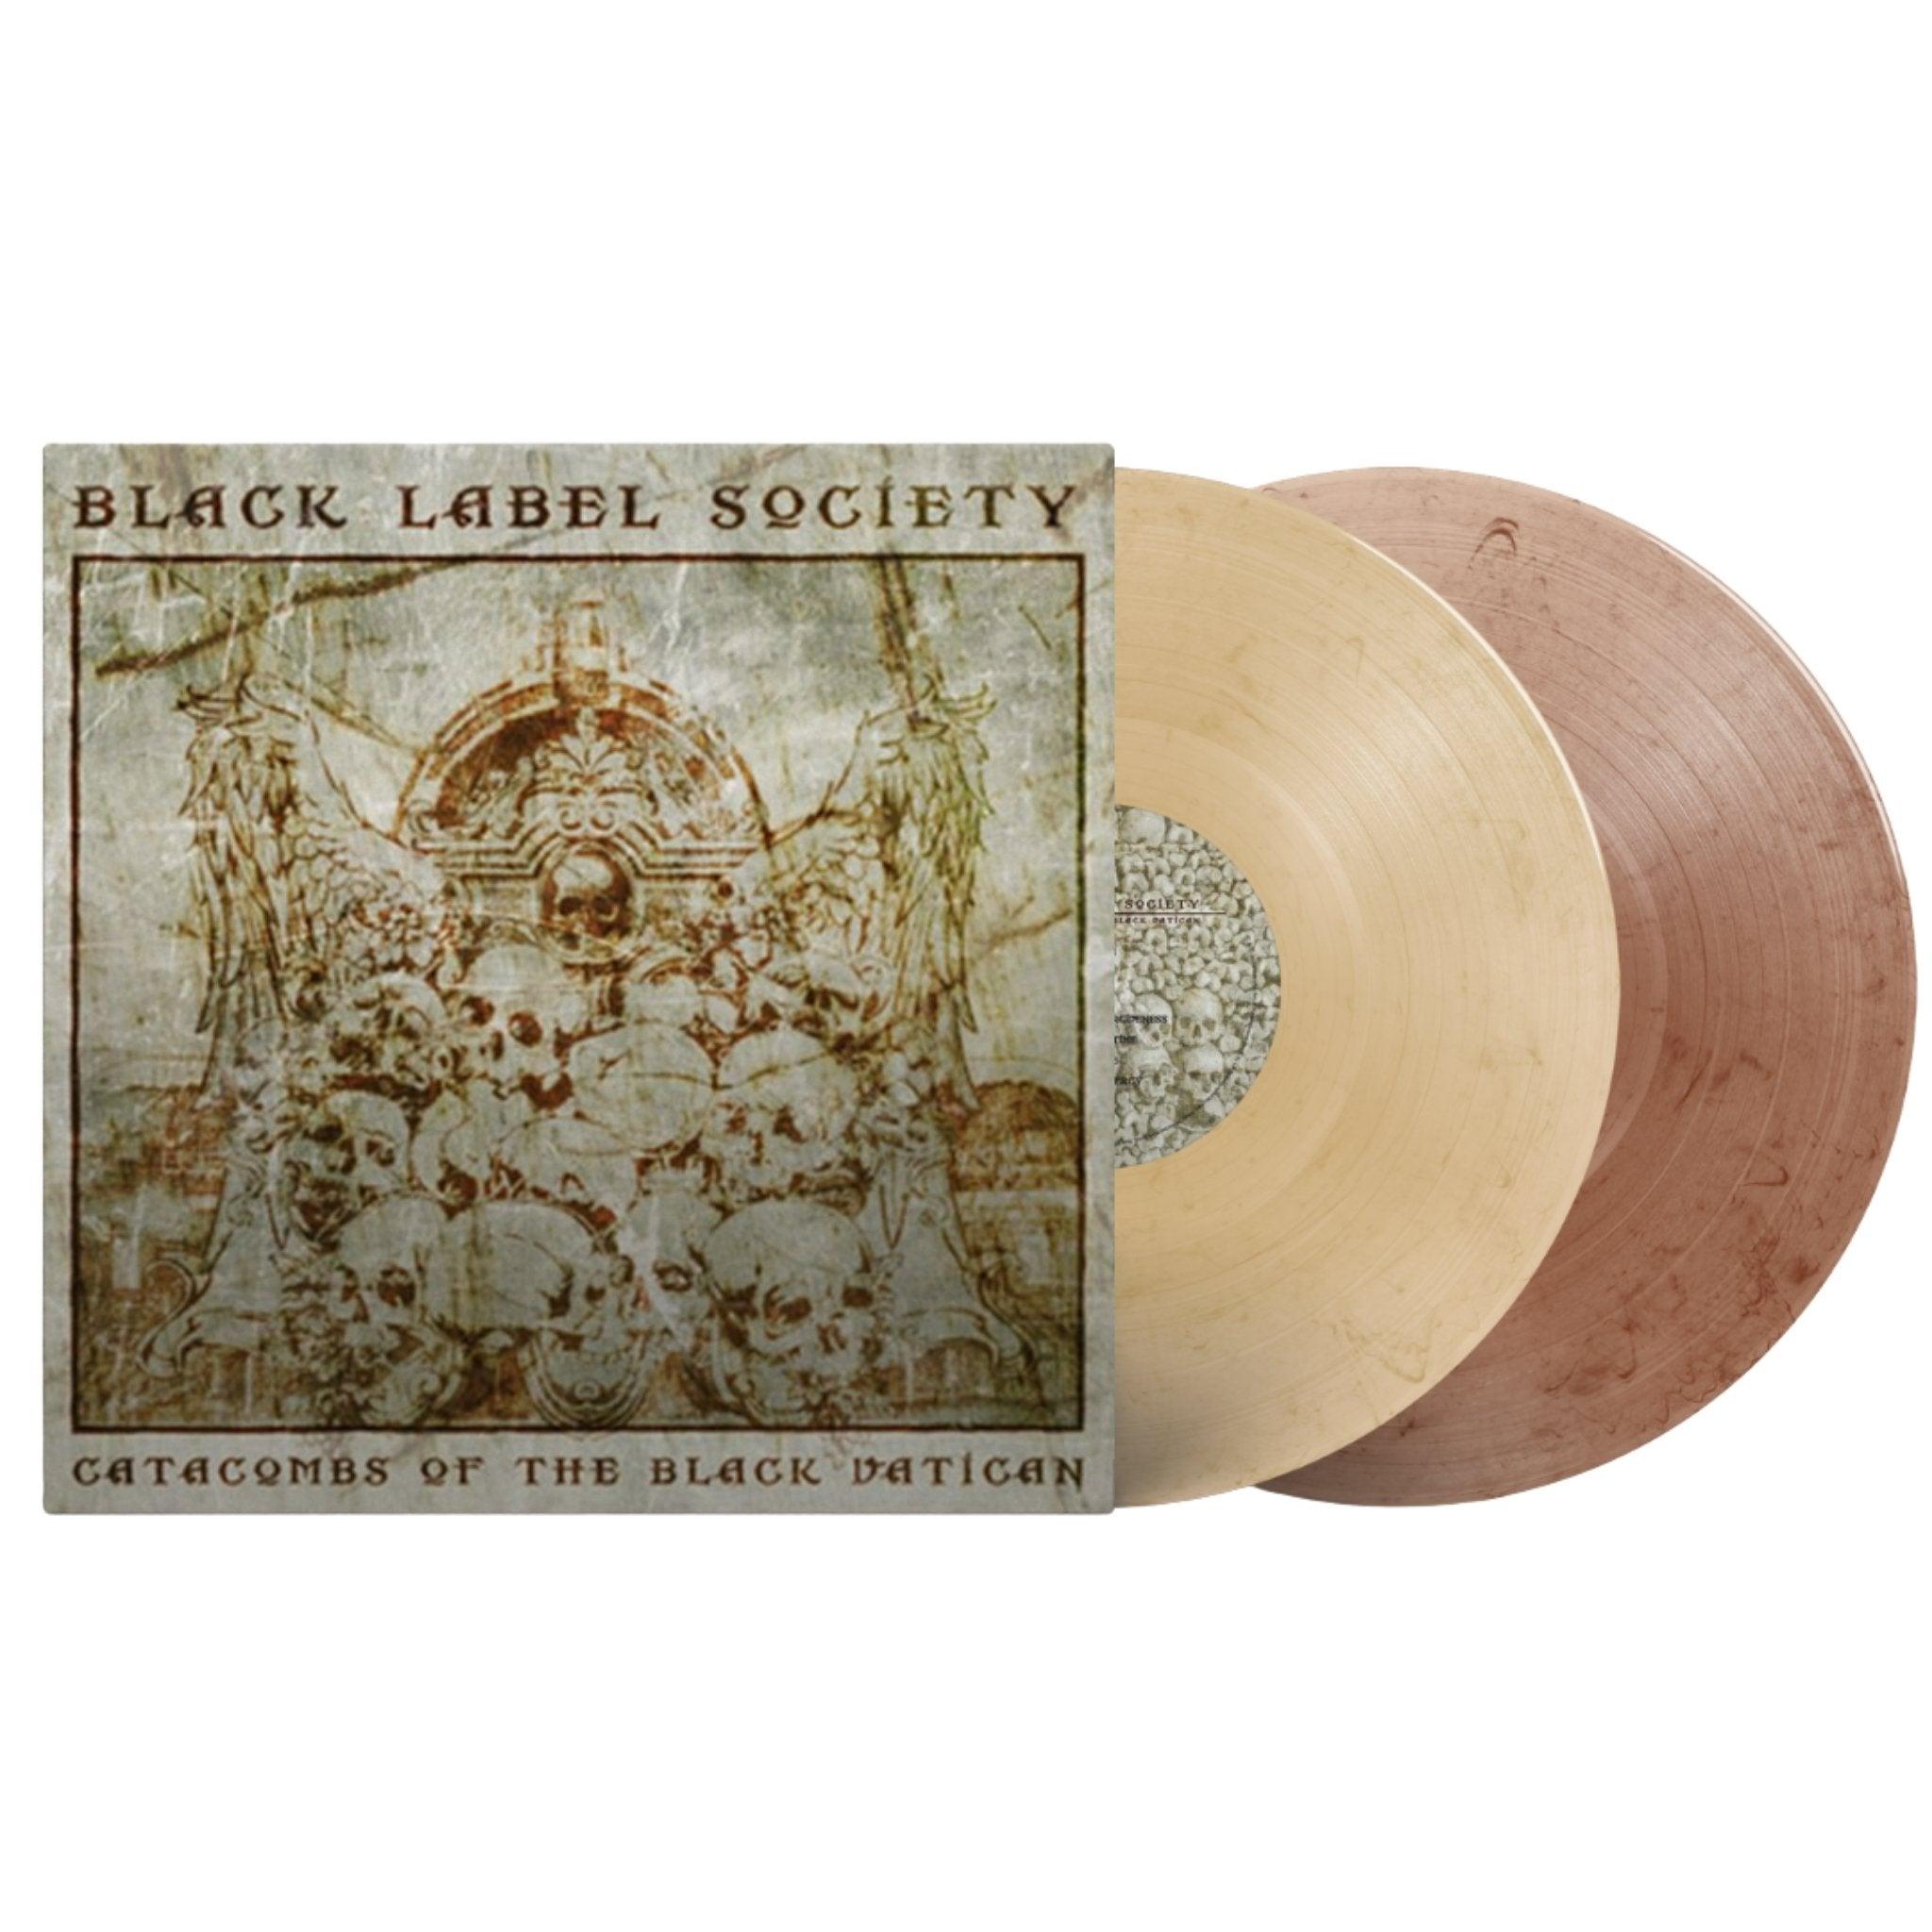 Black Label Society - "Catacombs of the Black Vatican" Tan Vinyl LP (Blemished)